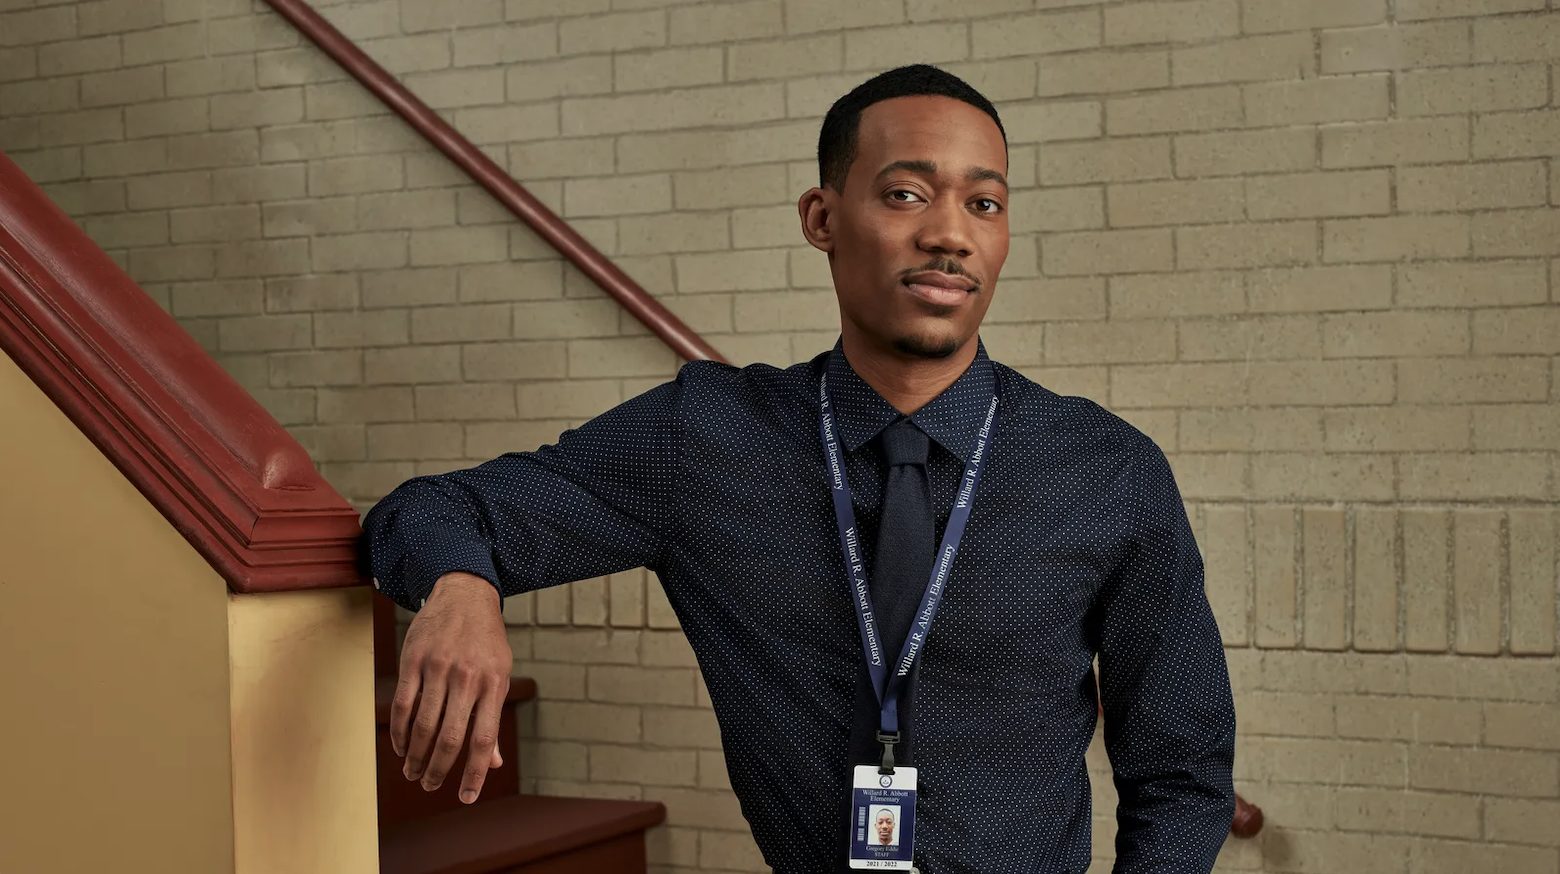 A Black man wearing a collared shirt and a lanyard stands with his arm against a stairs railing looking at the camera